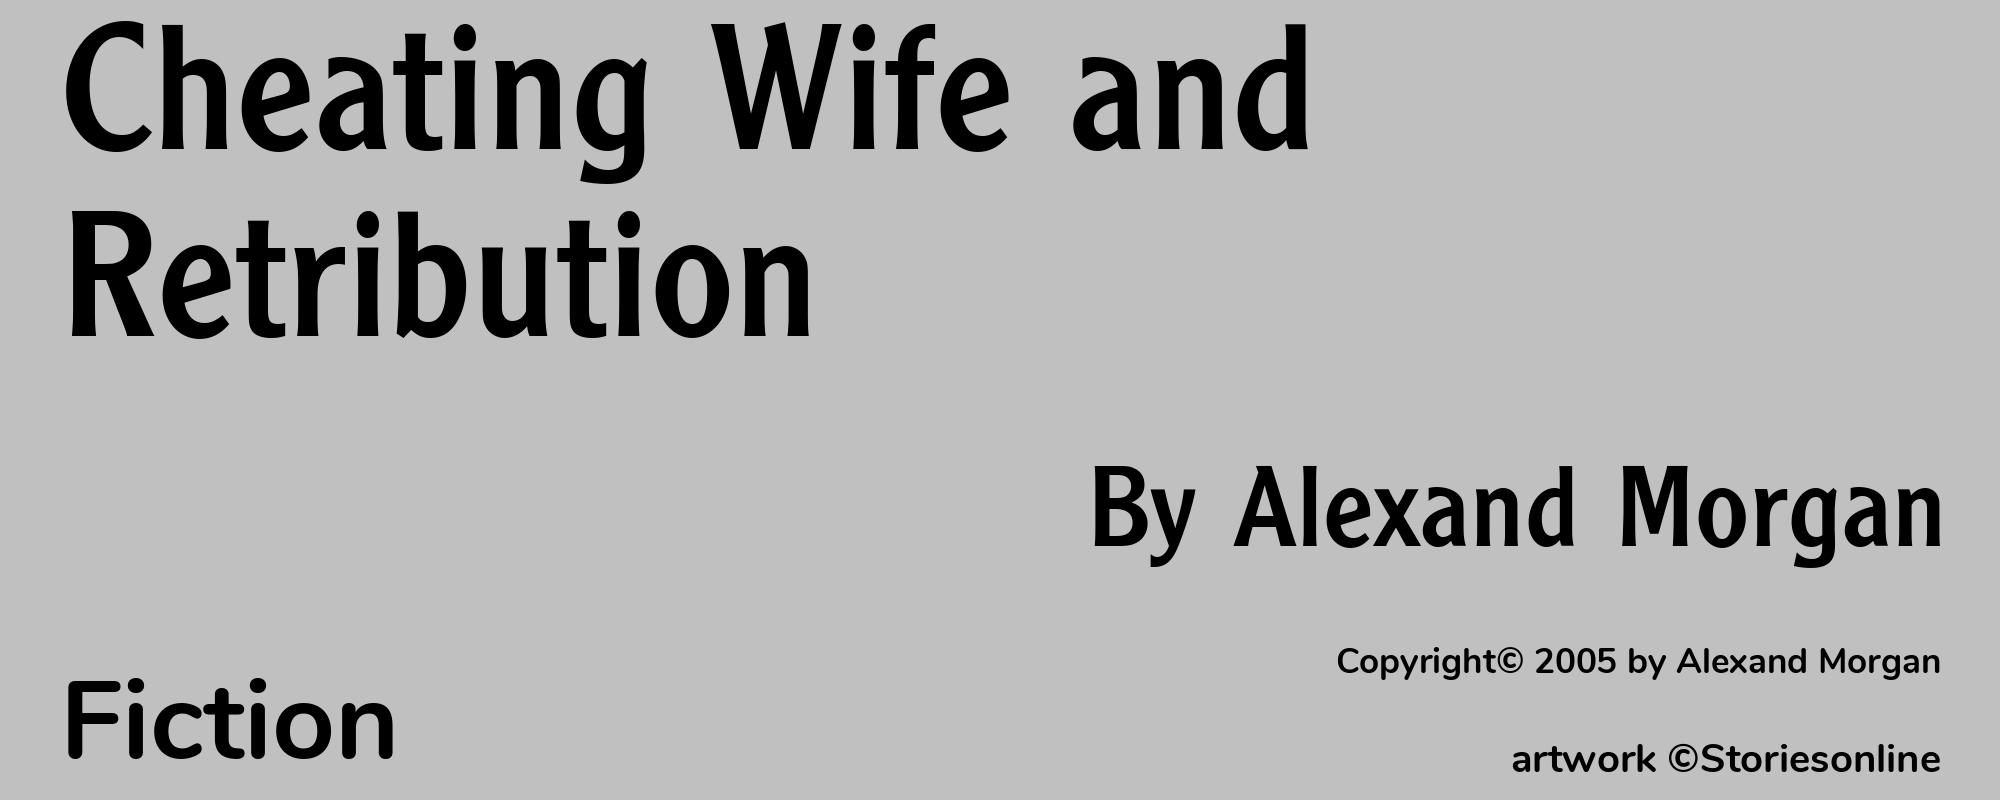 Cheating Wife and Retribution - Cover